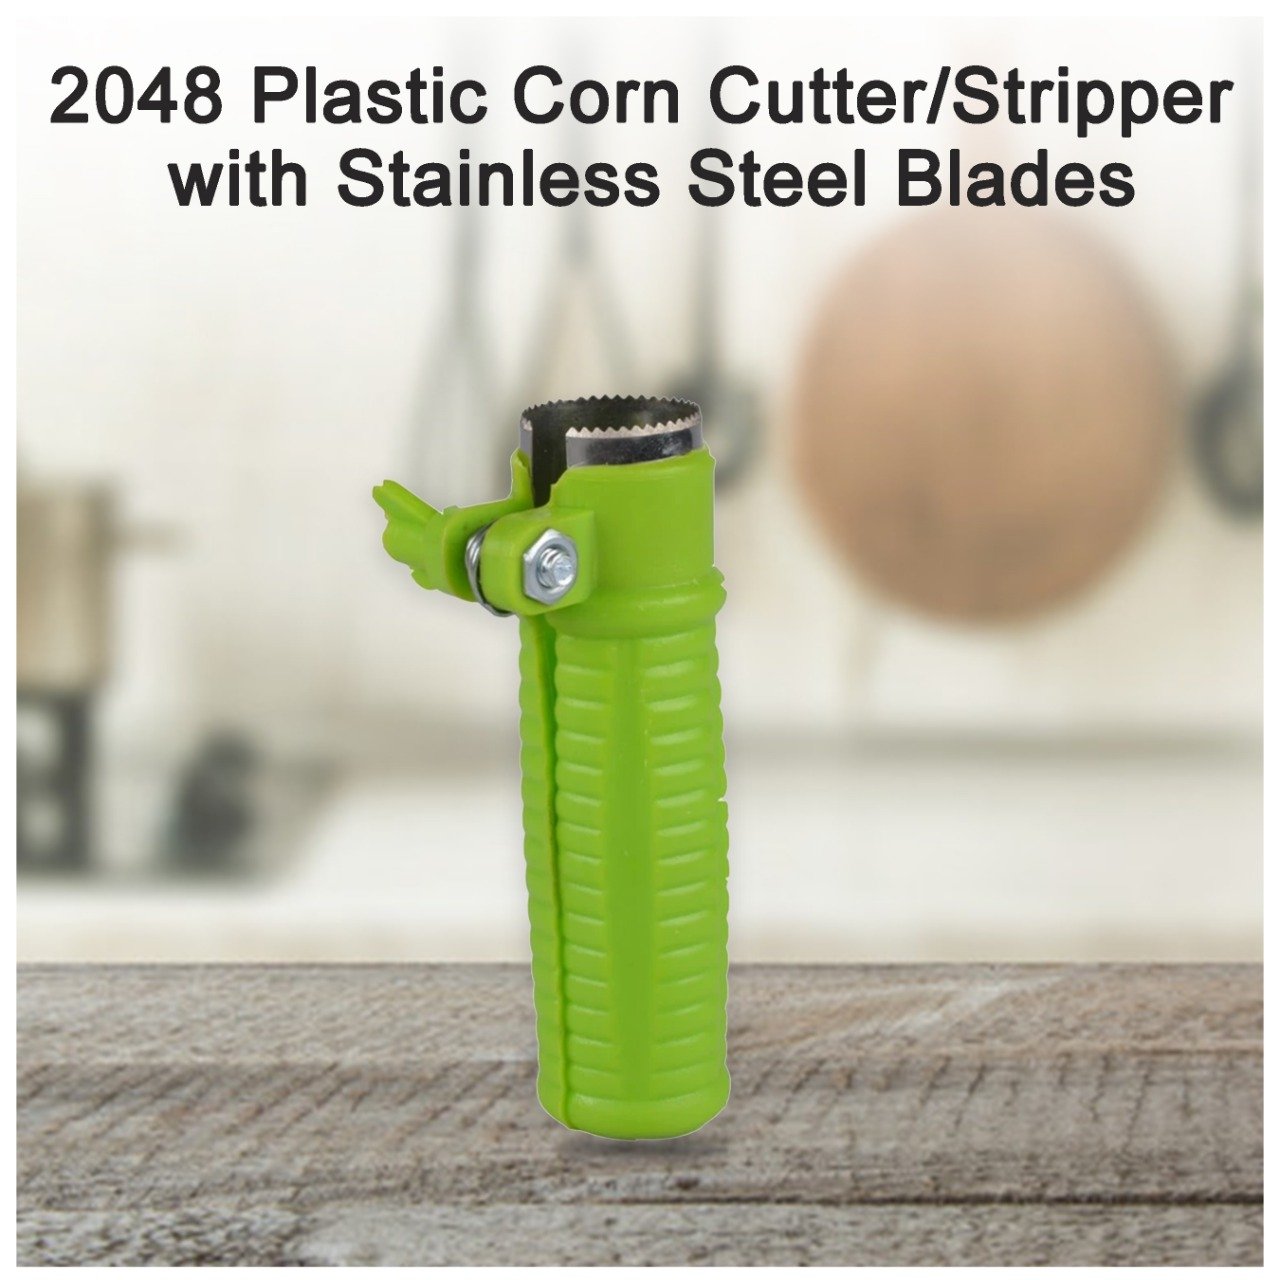 2048 Plastic Corn Cutter/Stripper with Stainless Steel Blades - SkyShopy